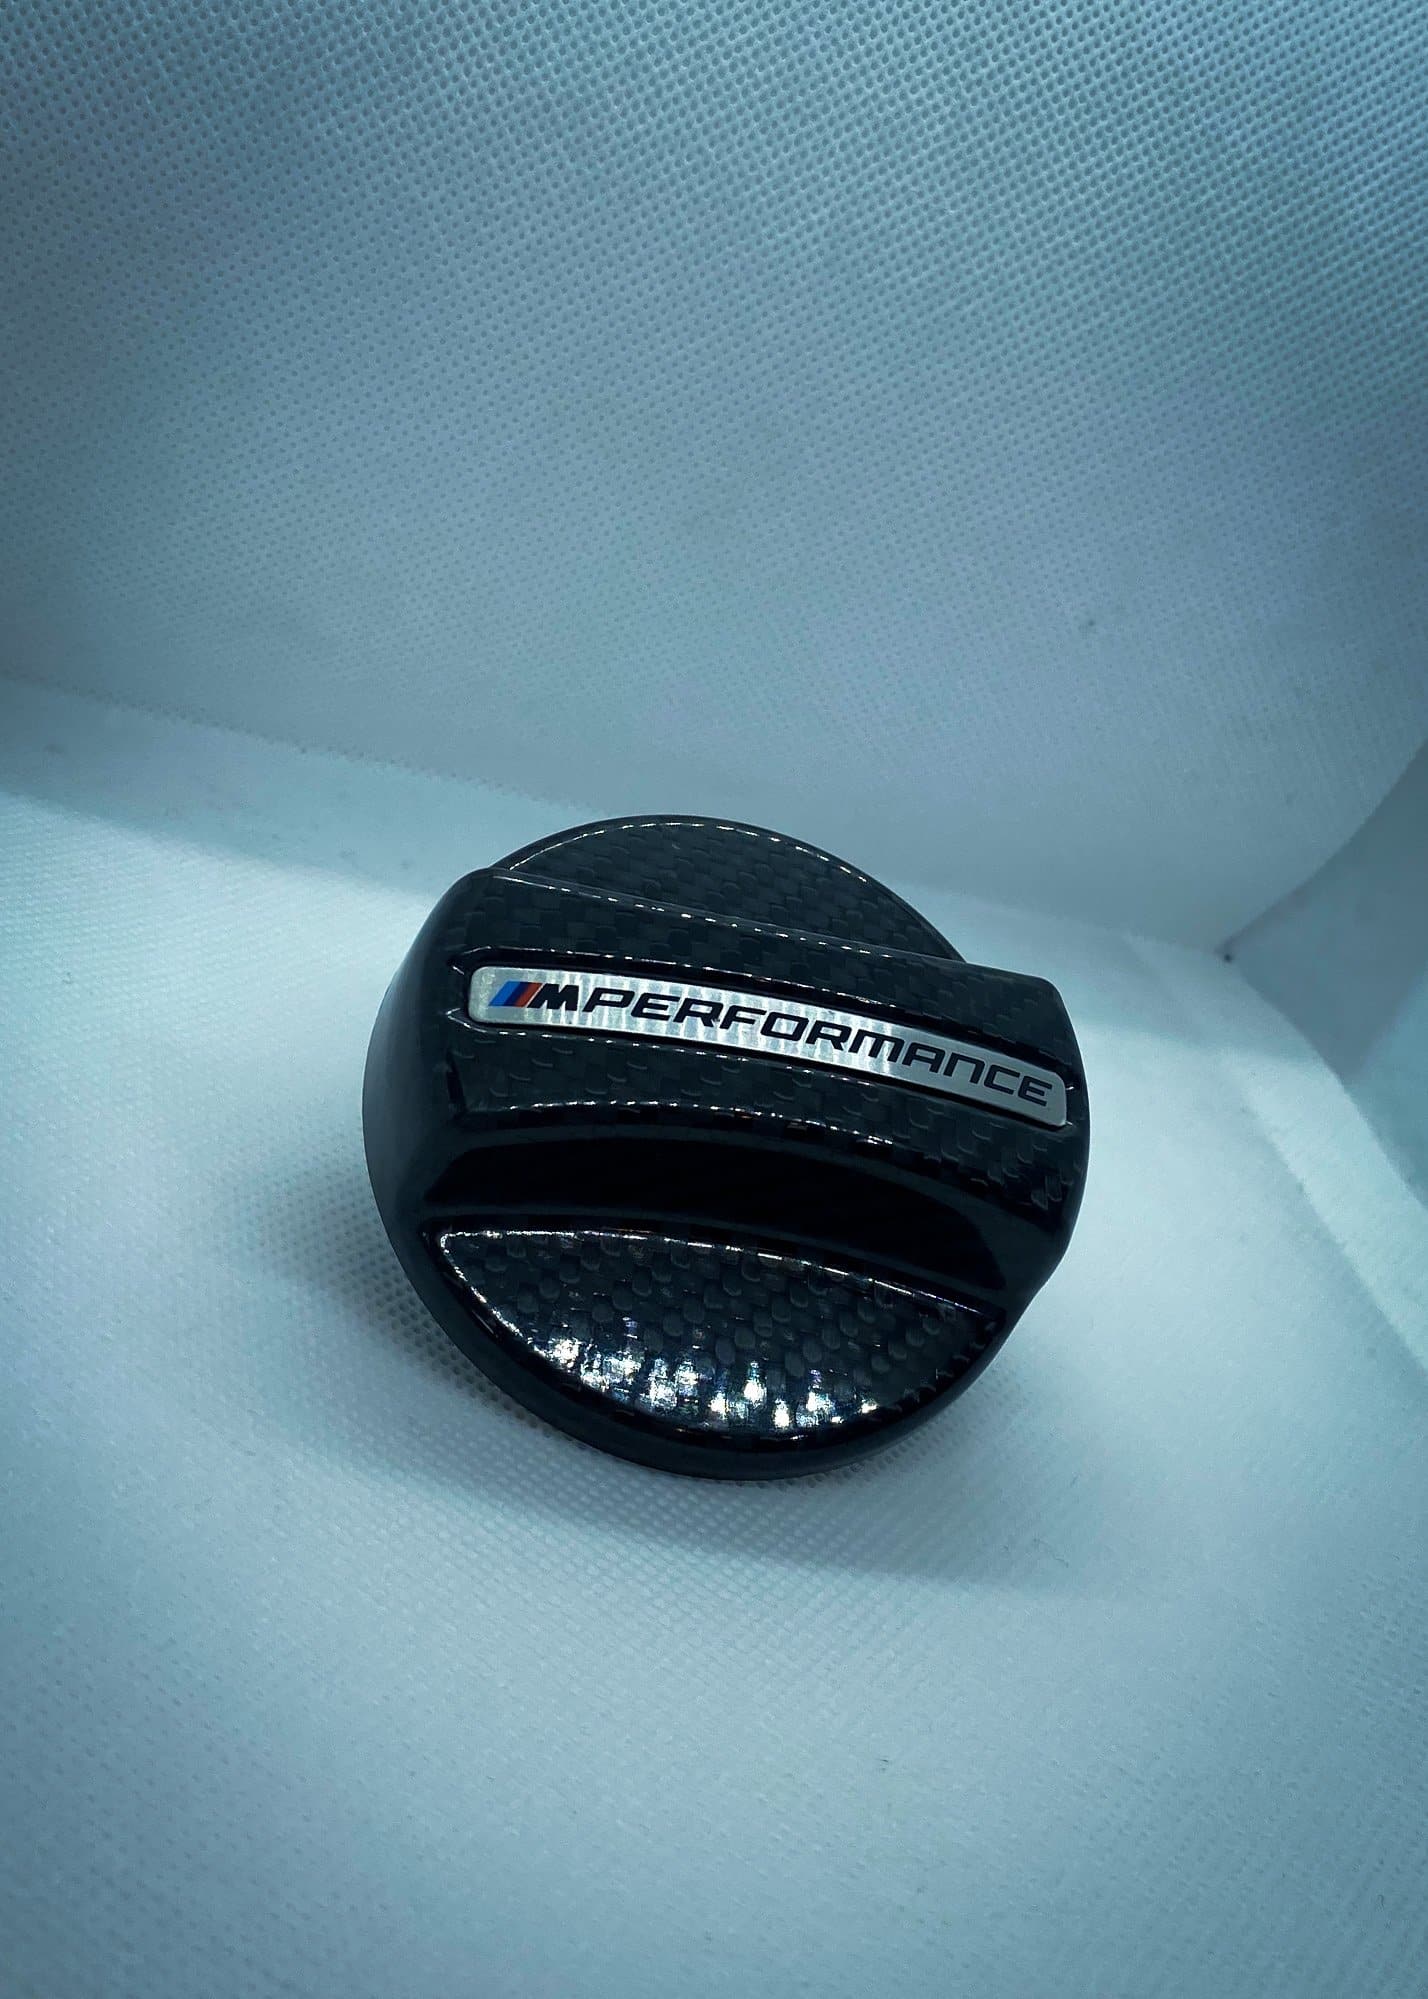 Images By XXIITUNING- Genuine BMW M Performance Fuel Cap Cover 16112472988 For BMW F Series Models